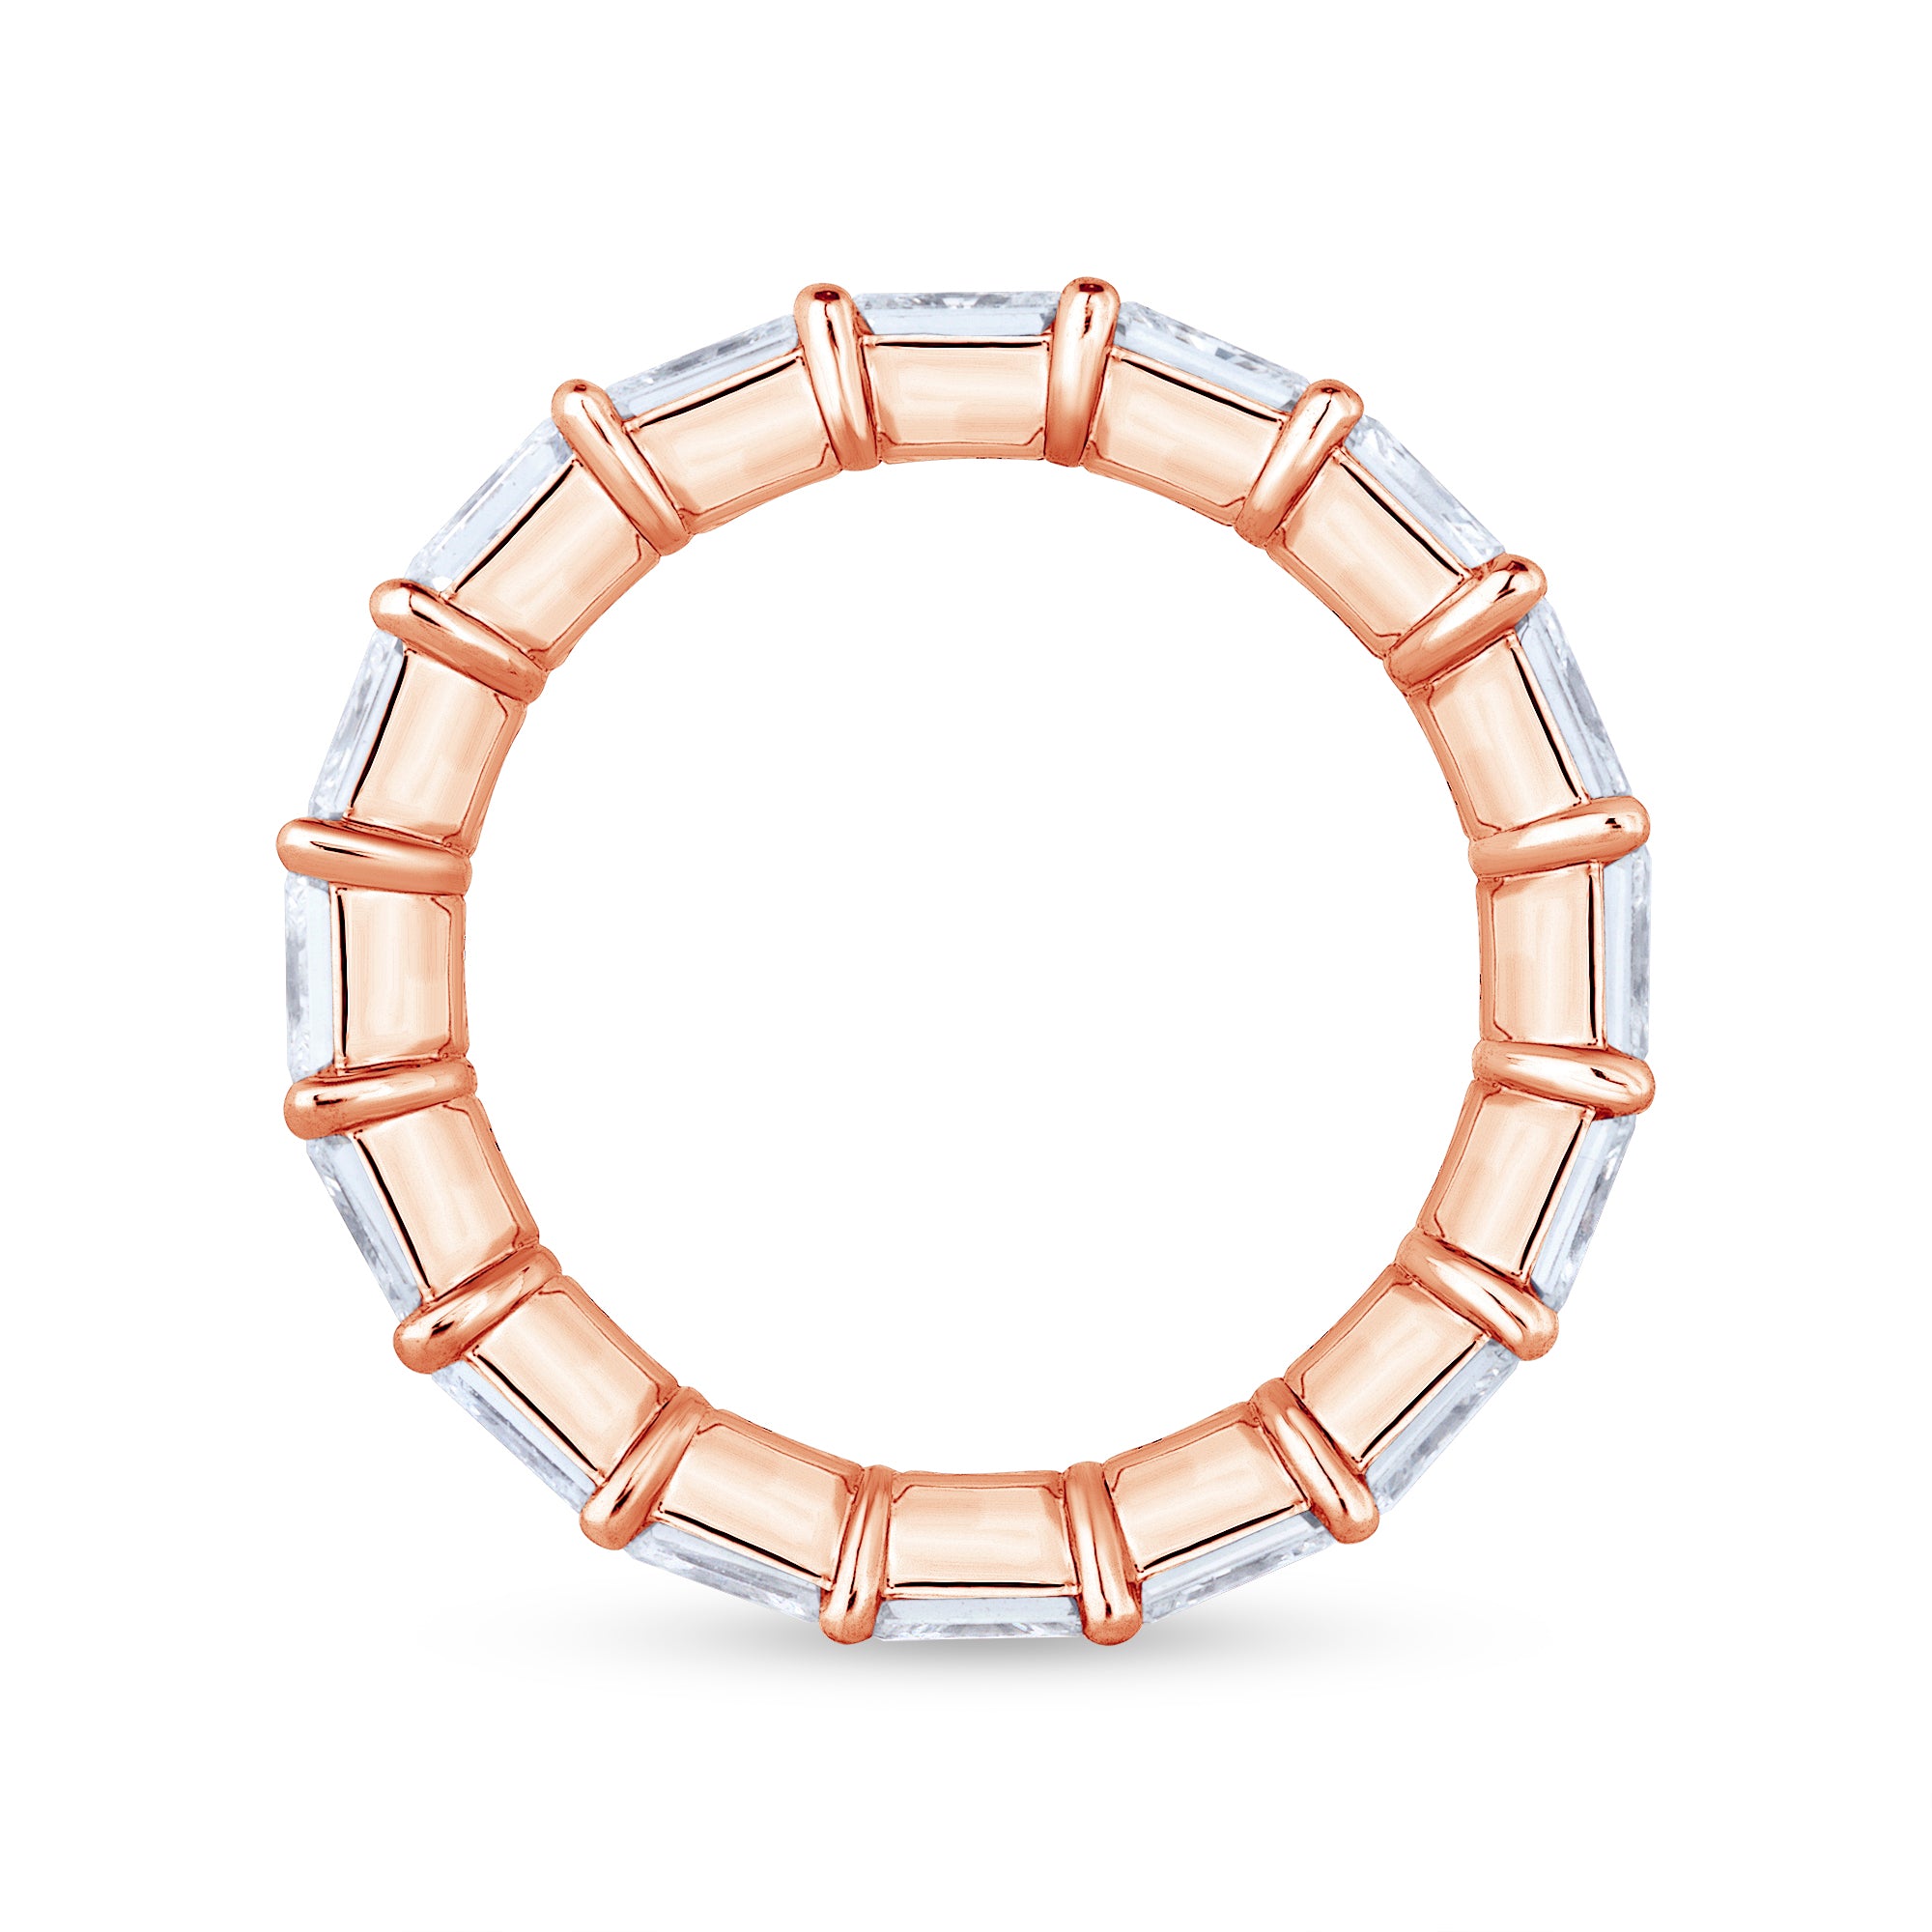 East-West Radiant Cut Rose Gold Eternity Band